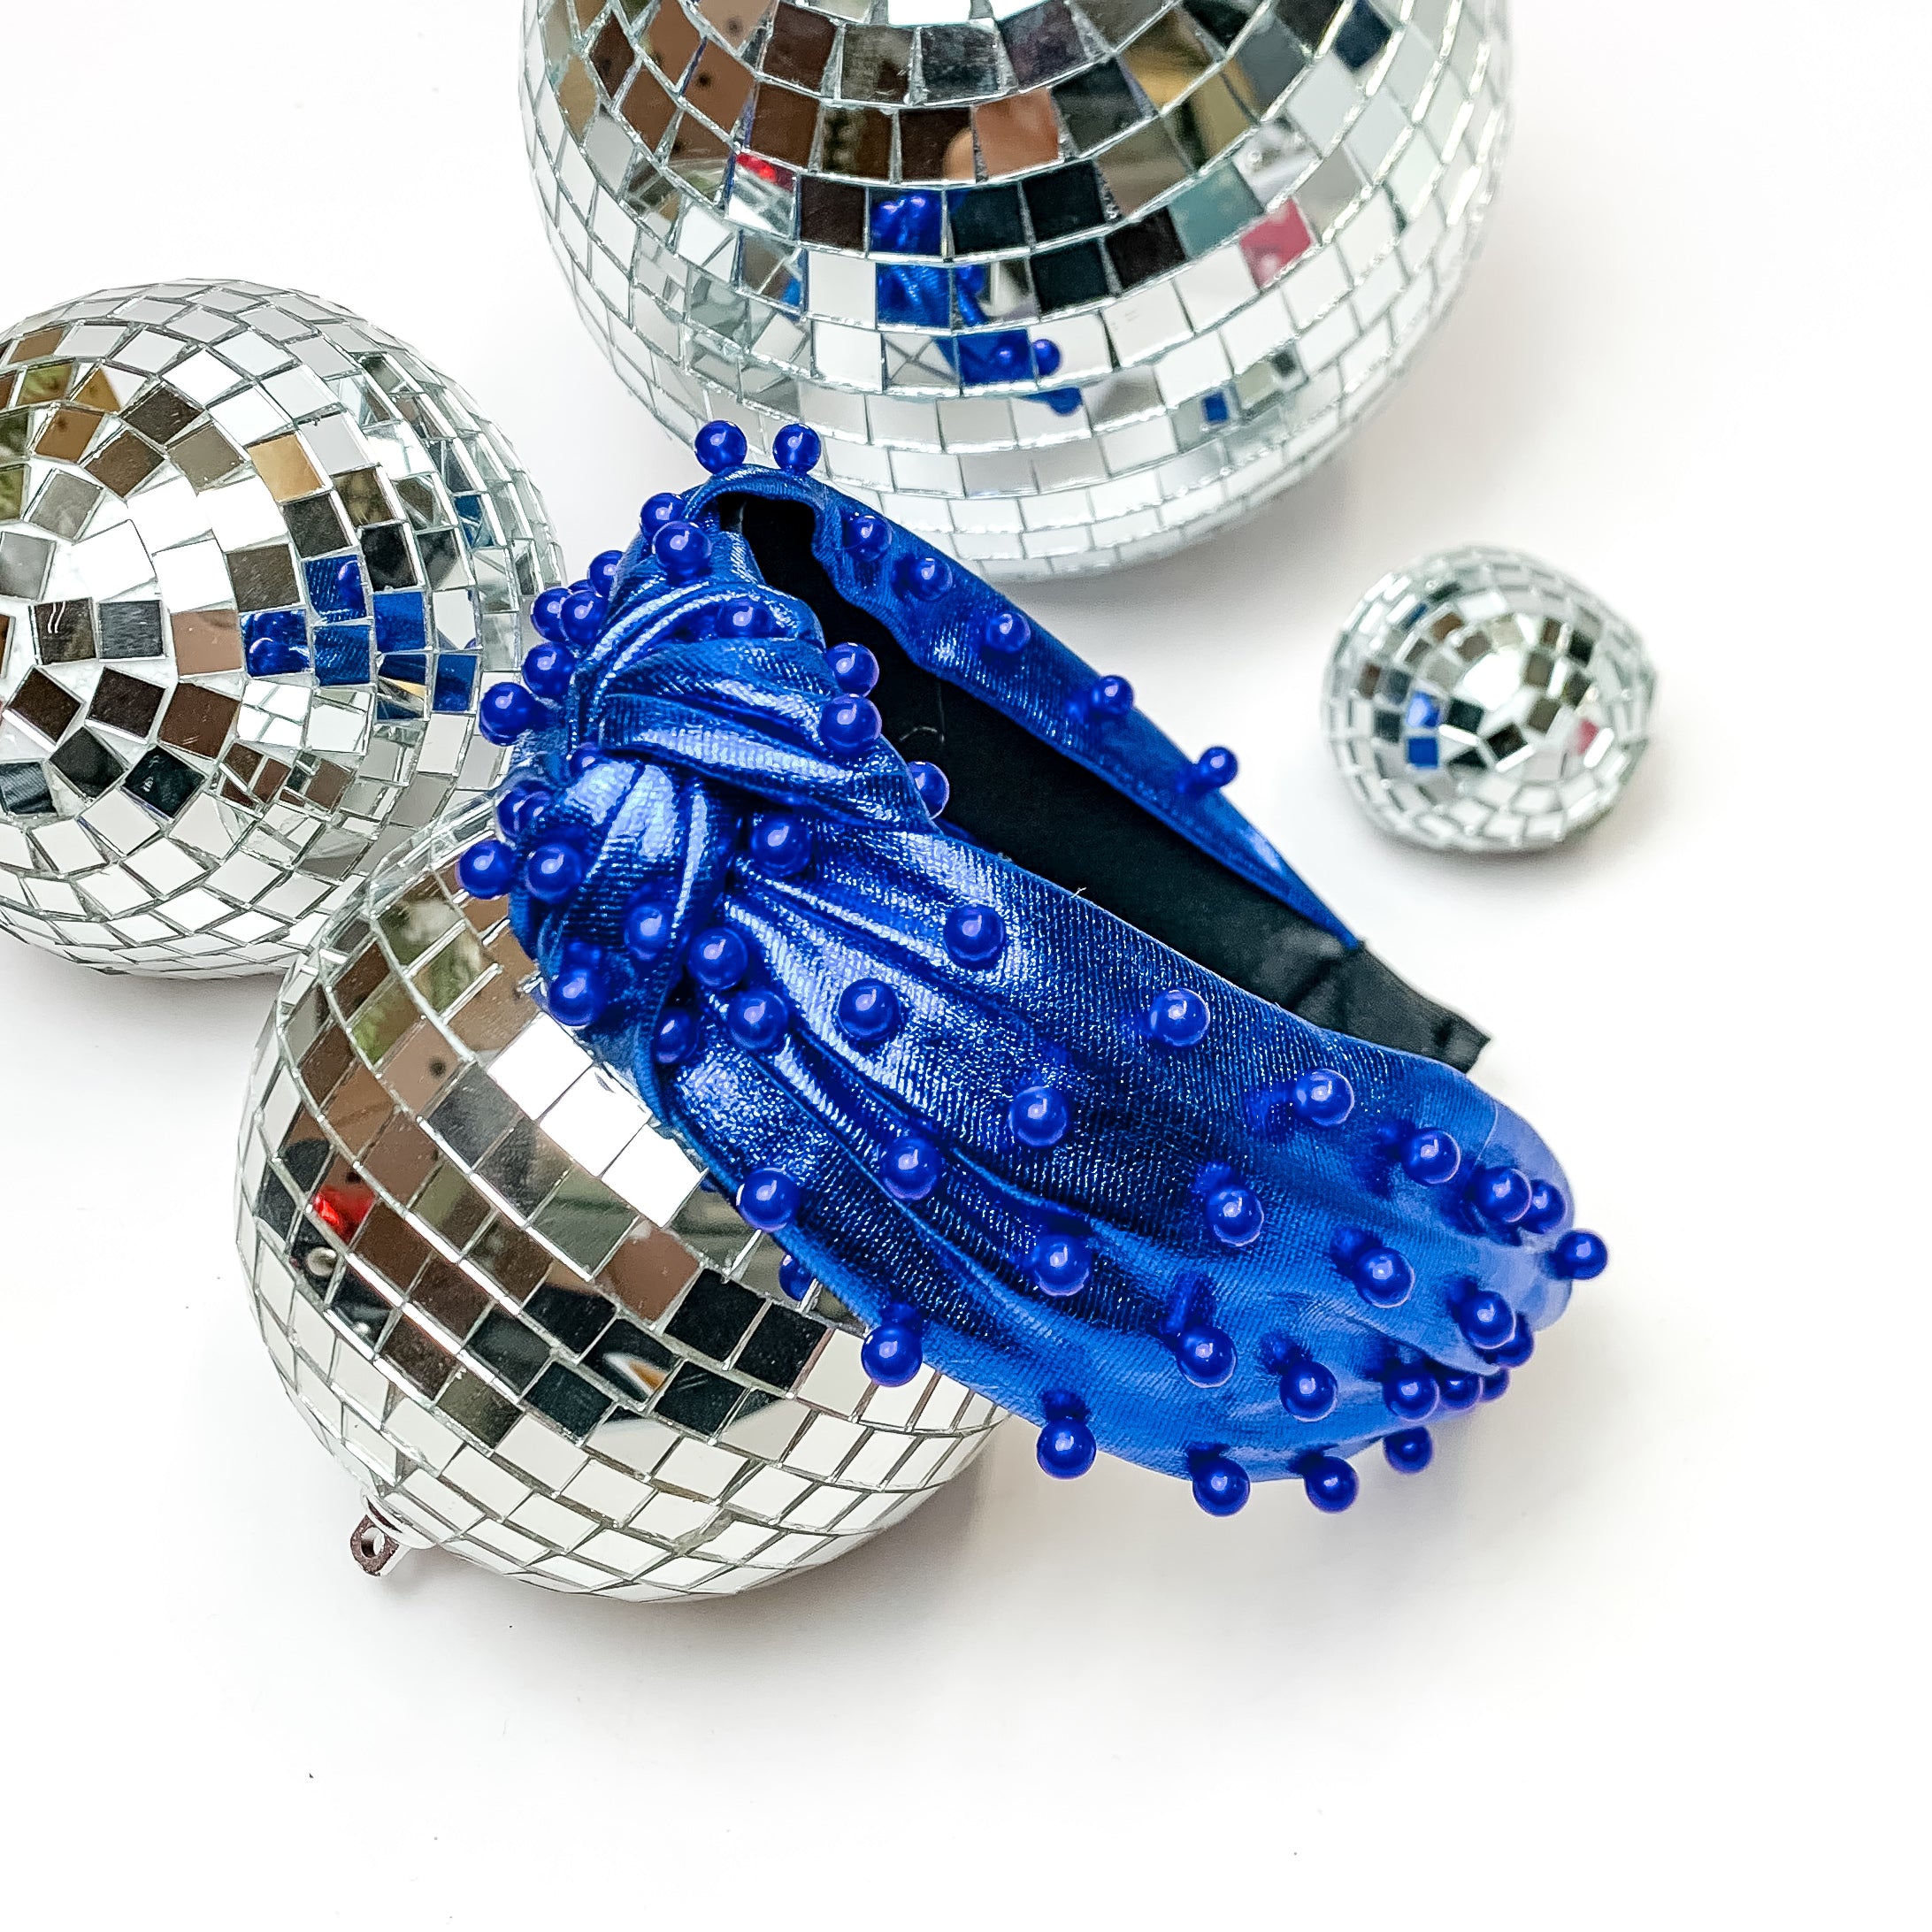 Top of the Charts Blue Headband With Blue Pearls. This headband is pictured on a white background and is surrounded by disco balls.